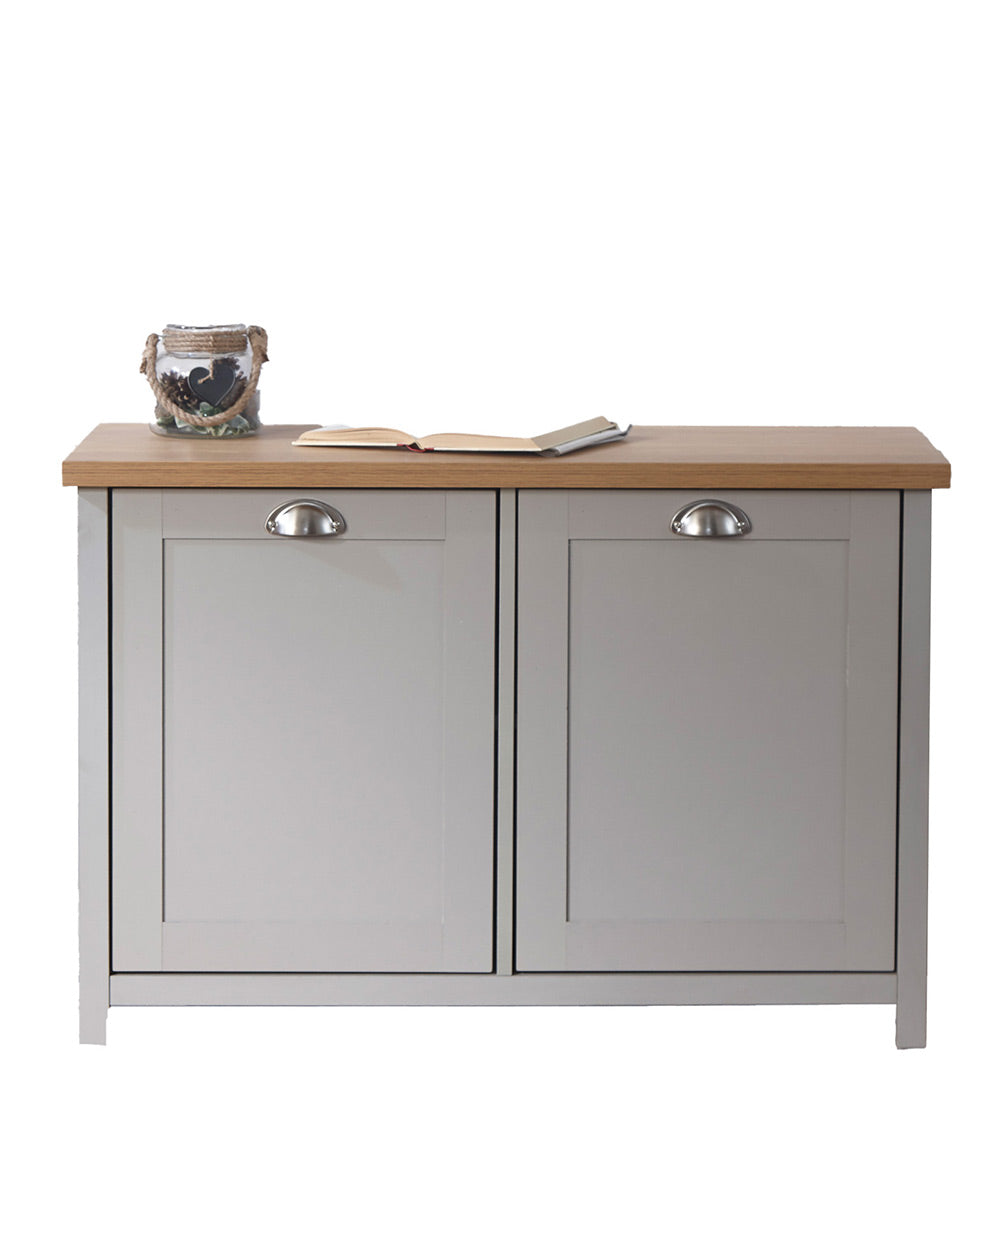 white cut out image of the lancaster shoe storage unit in grey with an oak effect top.